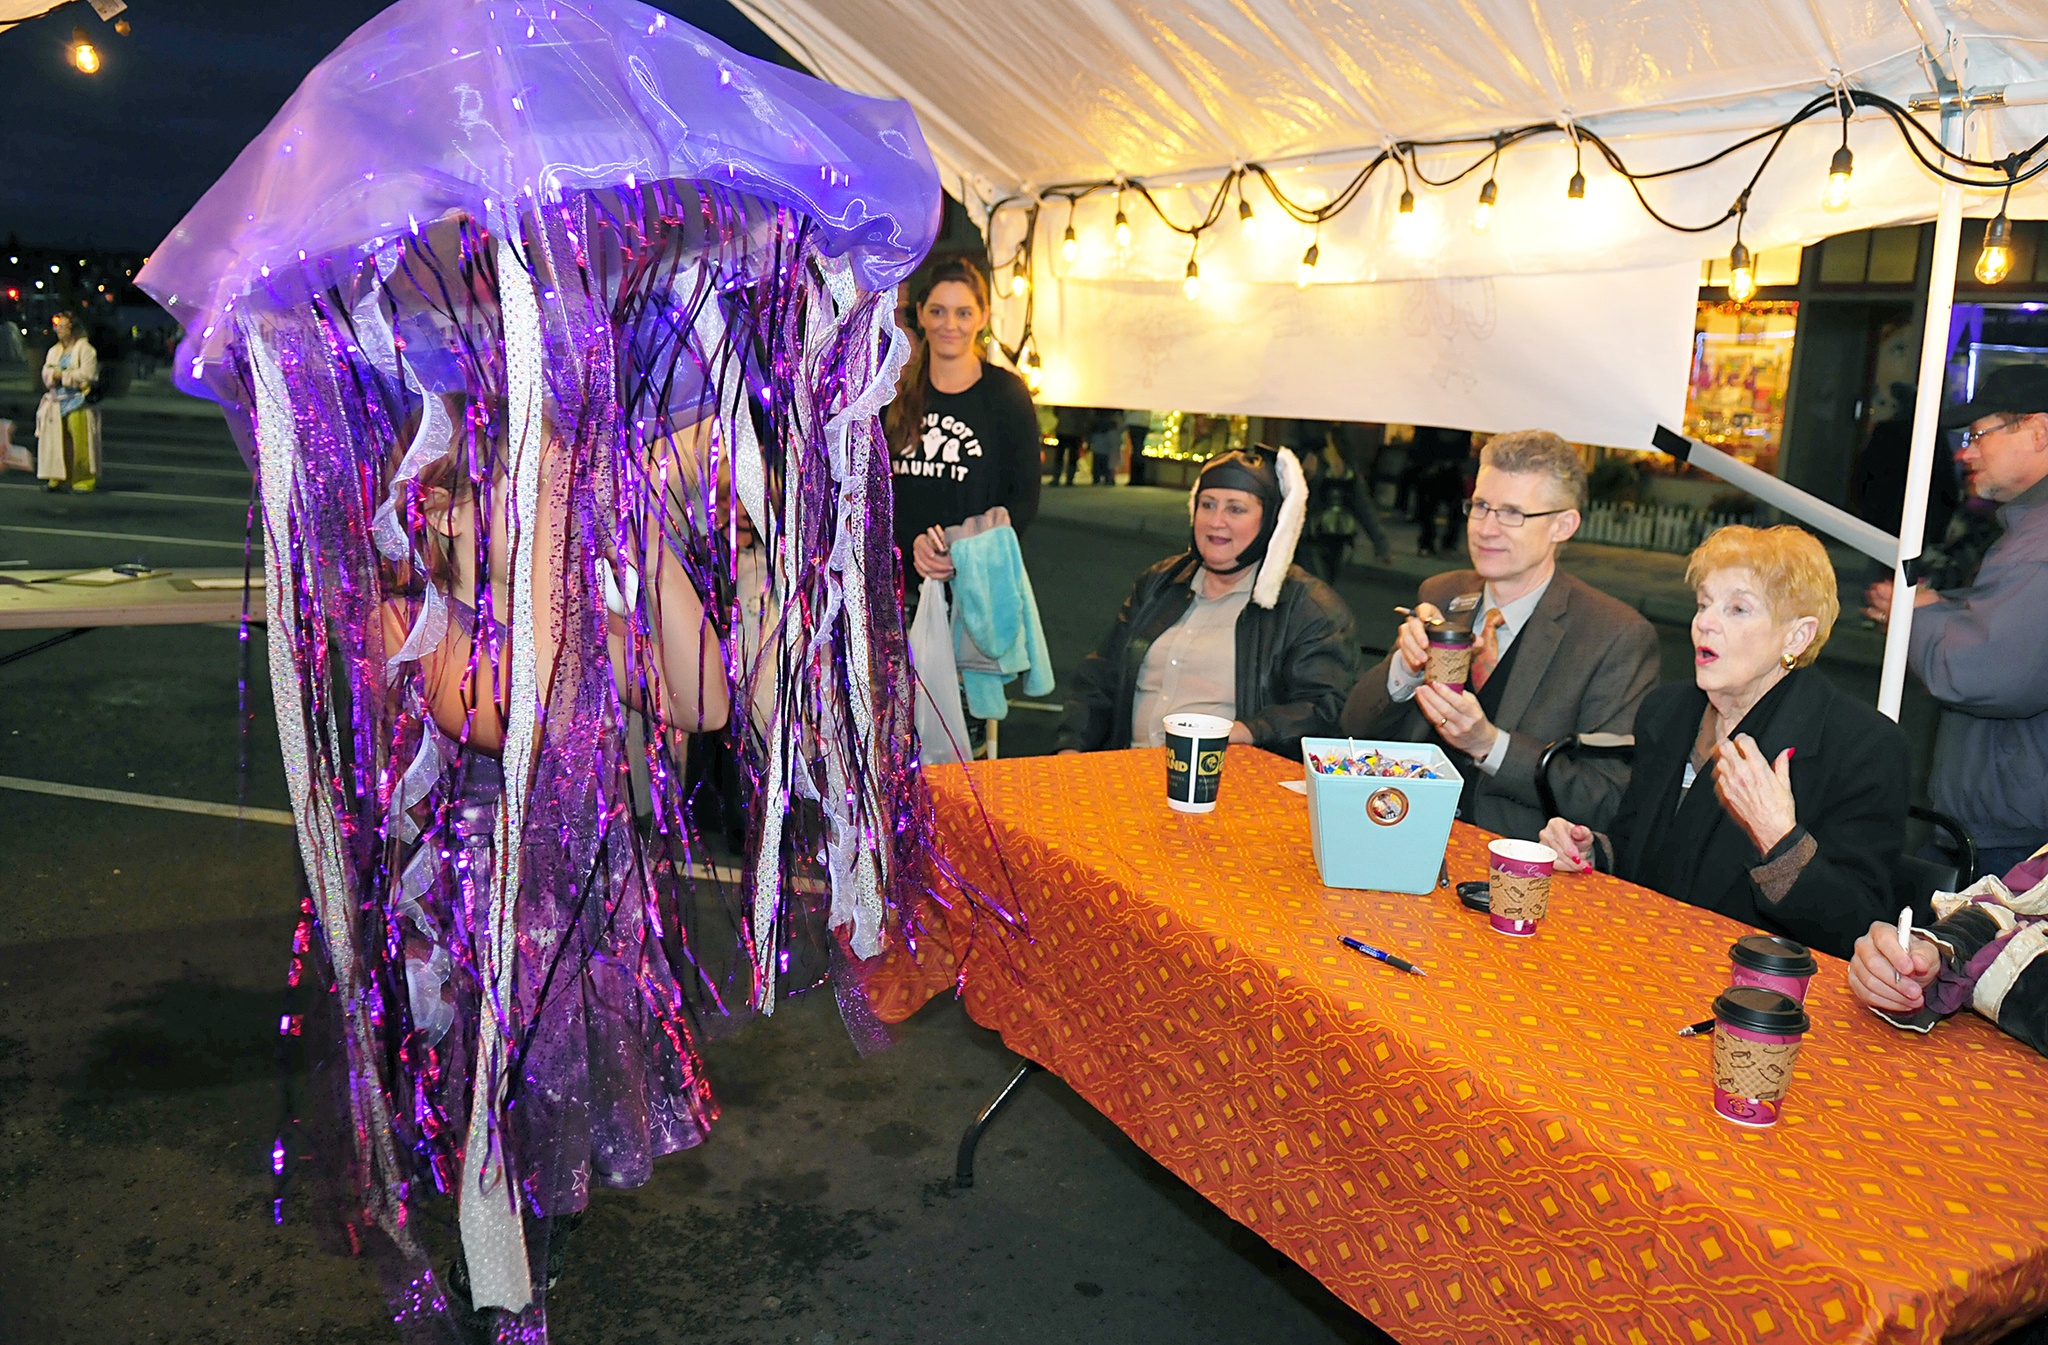 Nisa Hagan, left, shows off her jellyfish costume to judges Lance Gibbon, Oak Harbor Public School superintendent and Sandra Mulkey, director at Regency on Whidbey Monday on Pioneer Way in Oak Harbor. Photo by Michael Watkins/Whidbey News-Times